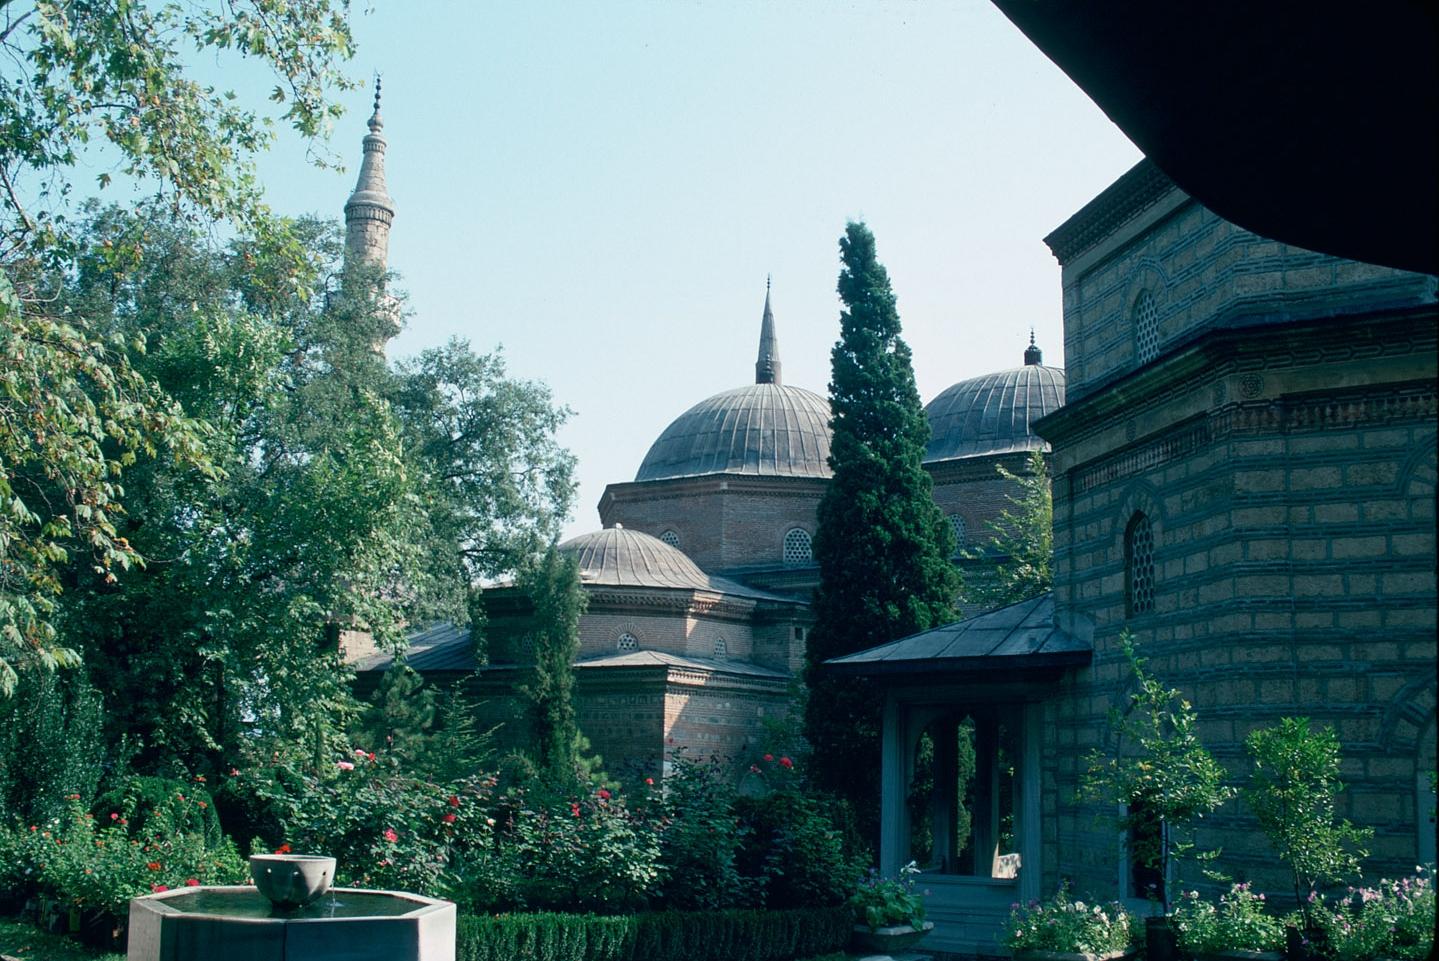 A view, from southwest, of the complex as seen from under the large eaves of the mausoleum of Murat II: the mosque is seen on the left in the distance, with the mausoleum of Mustafa-i Atik on the right